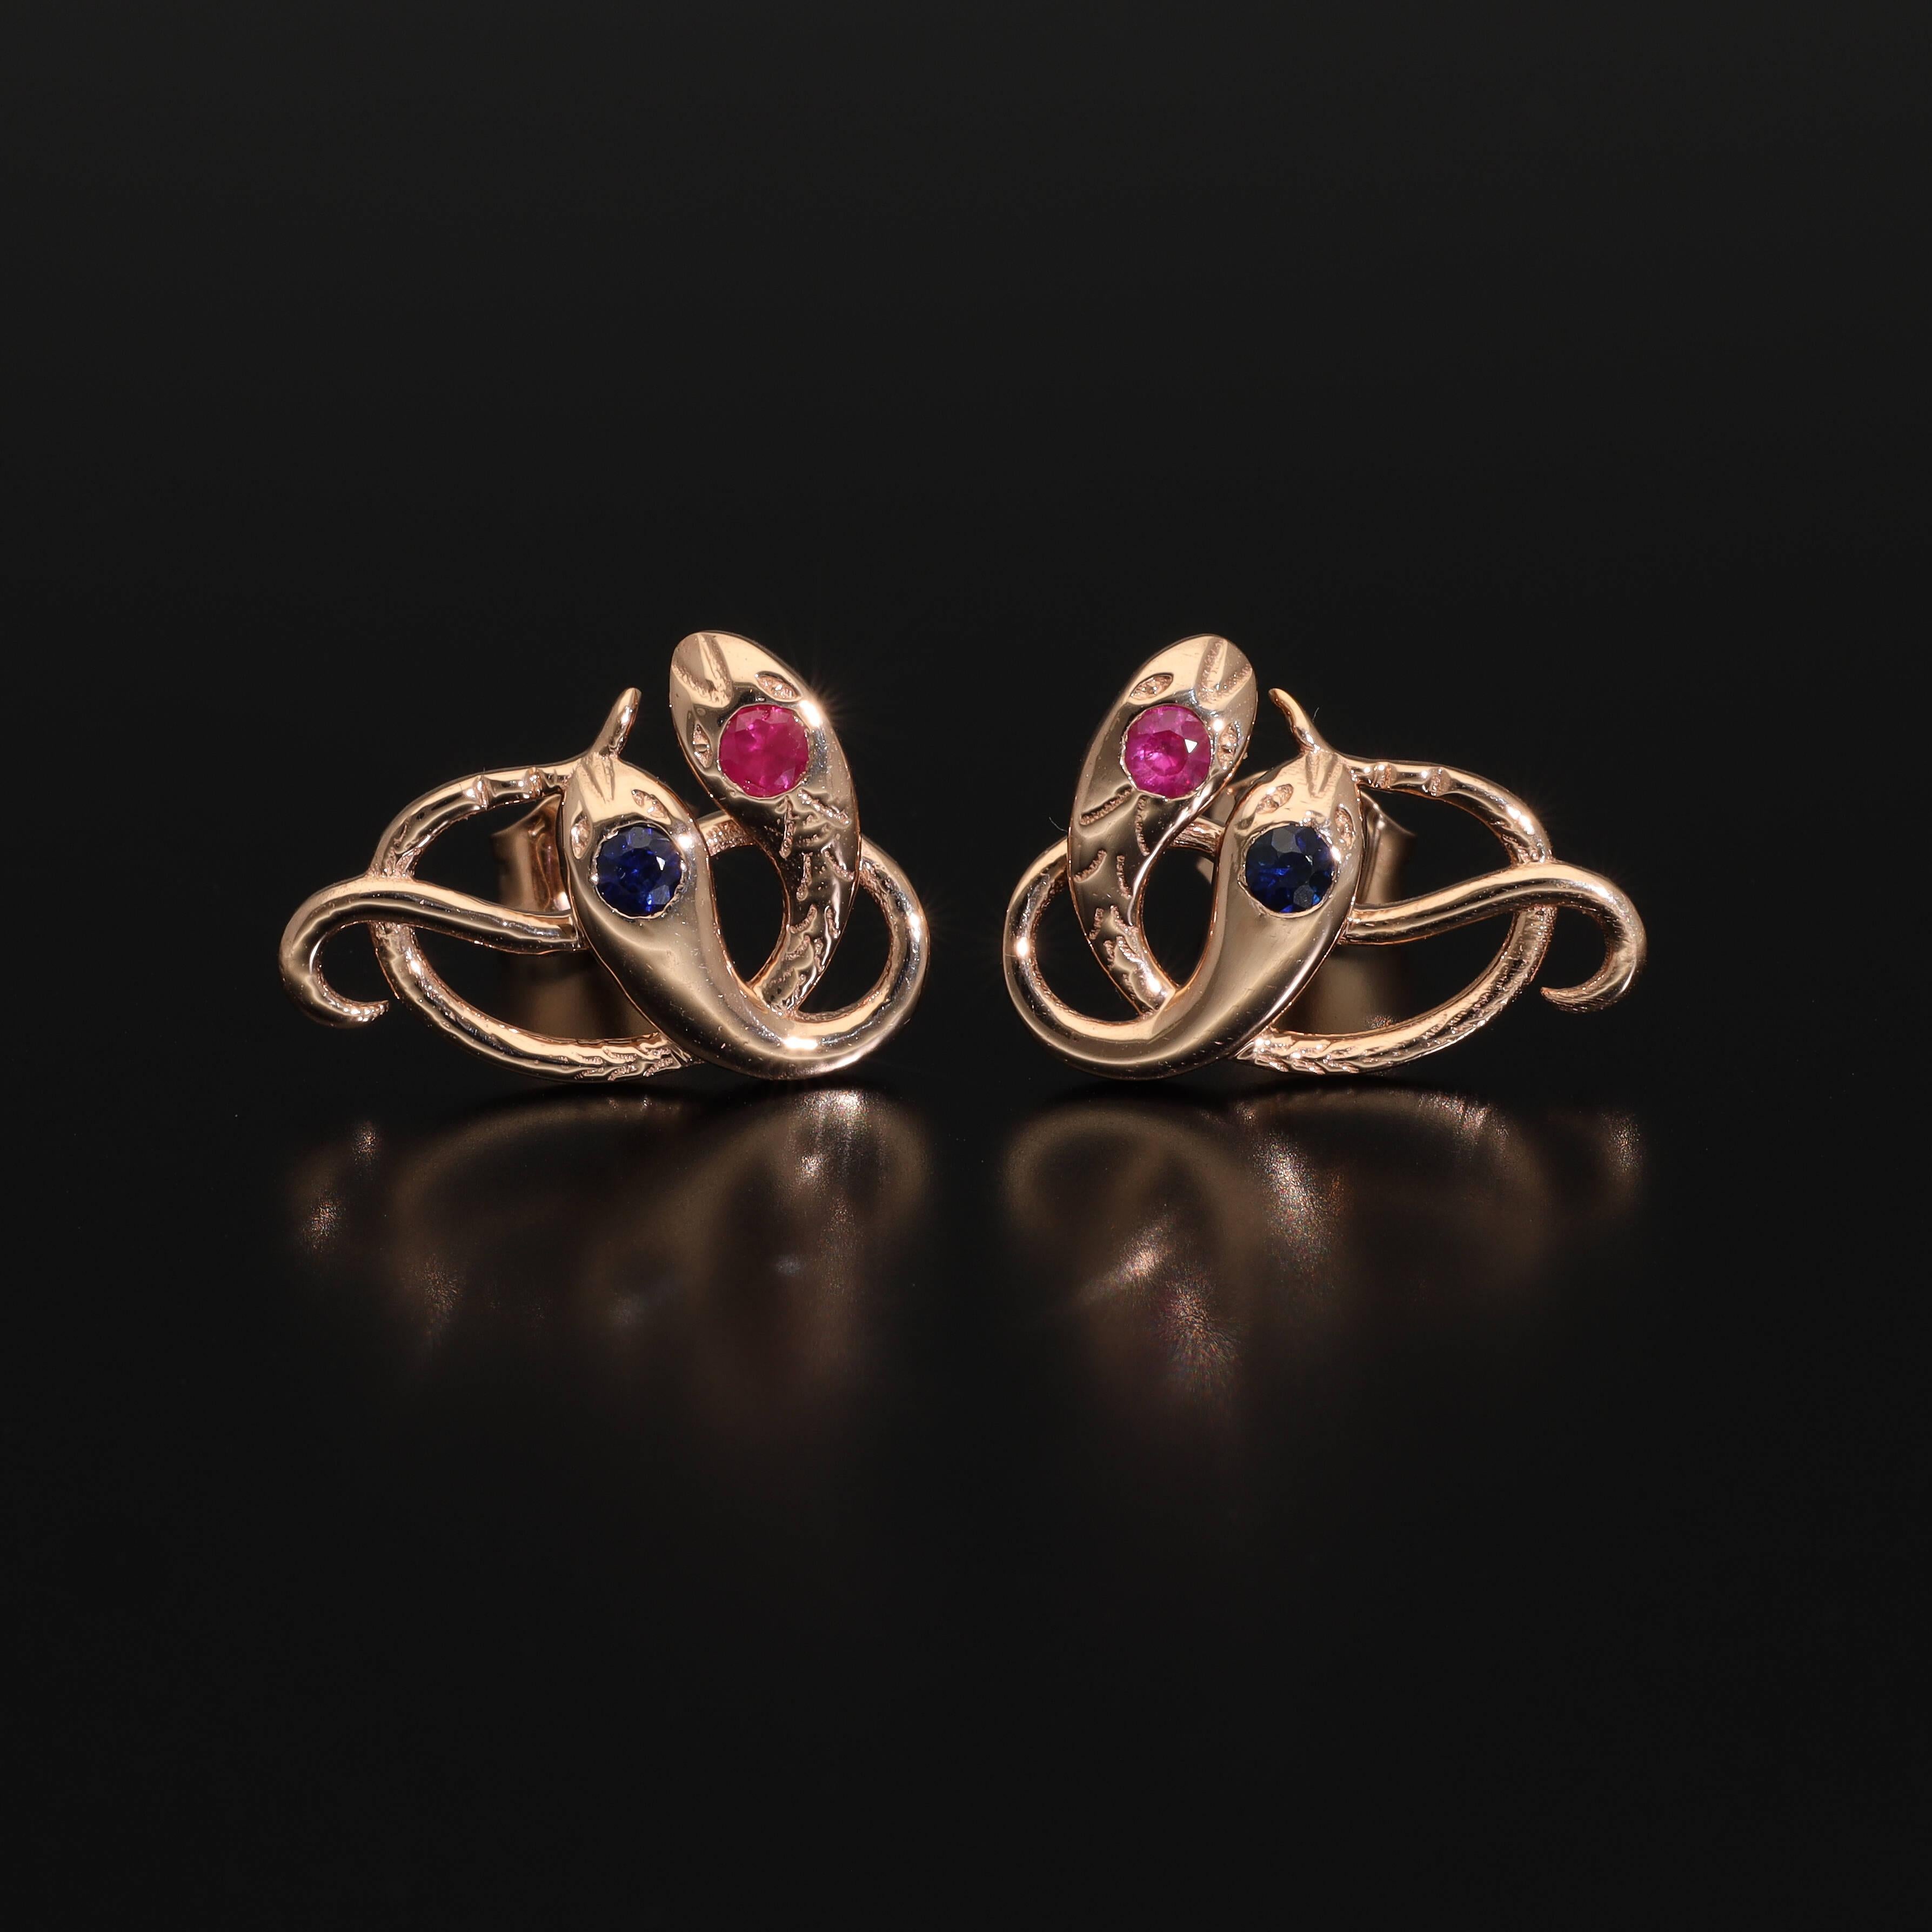 Antique Revival Gold Snake Stud Earrings, Ruby Sapphire Rose Gold Serpent Studs For Sale 2